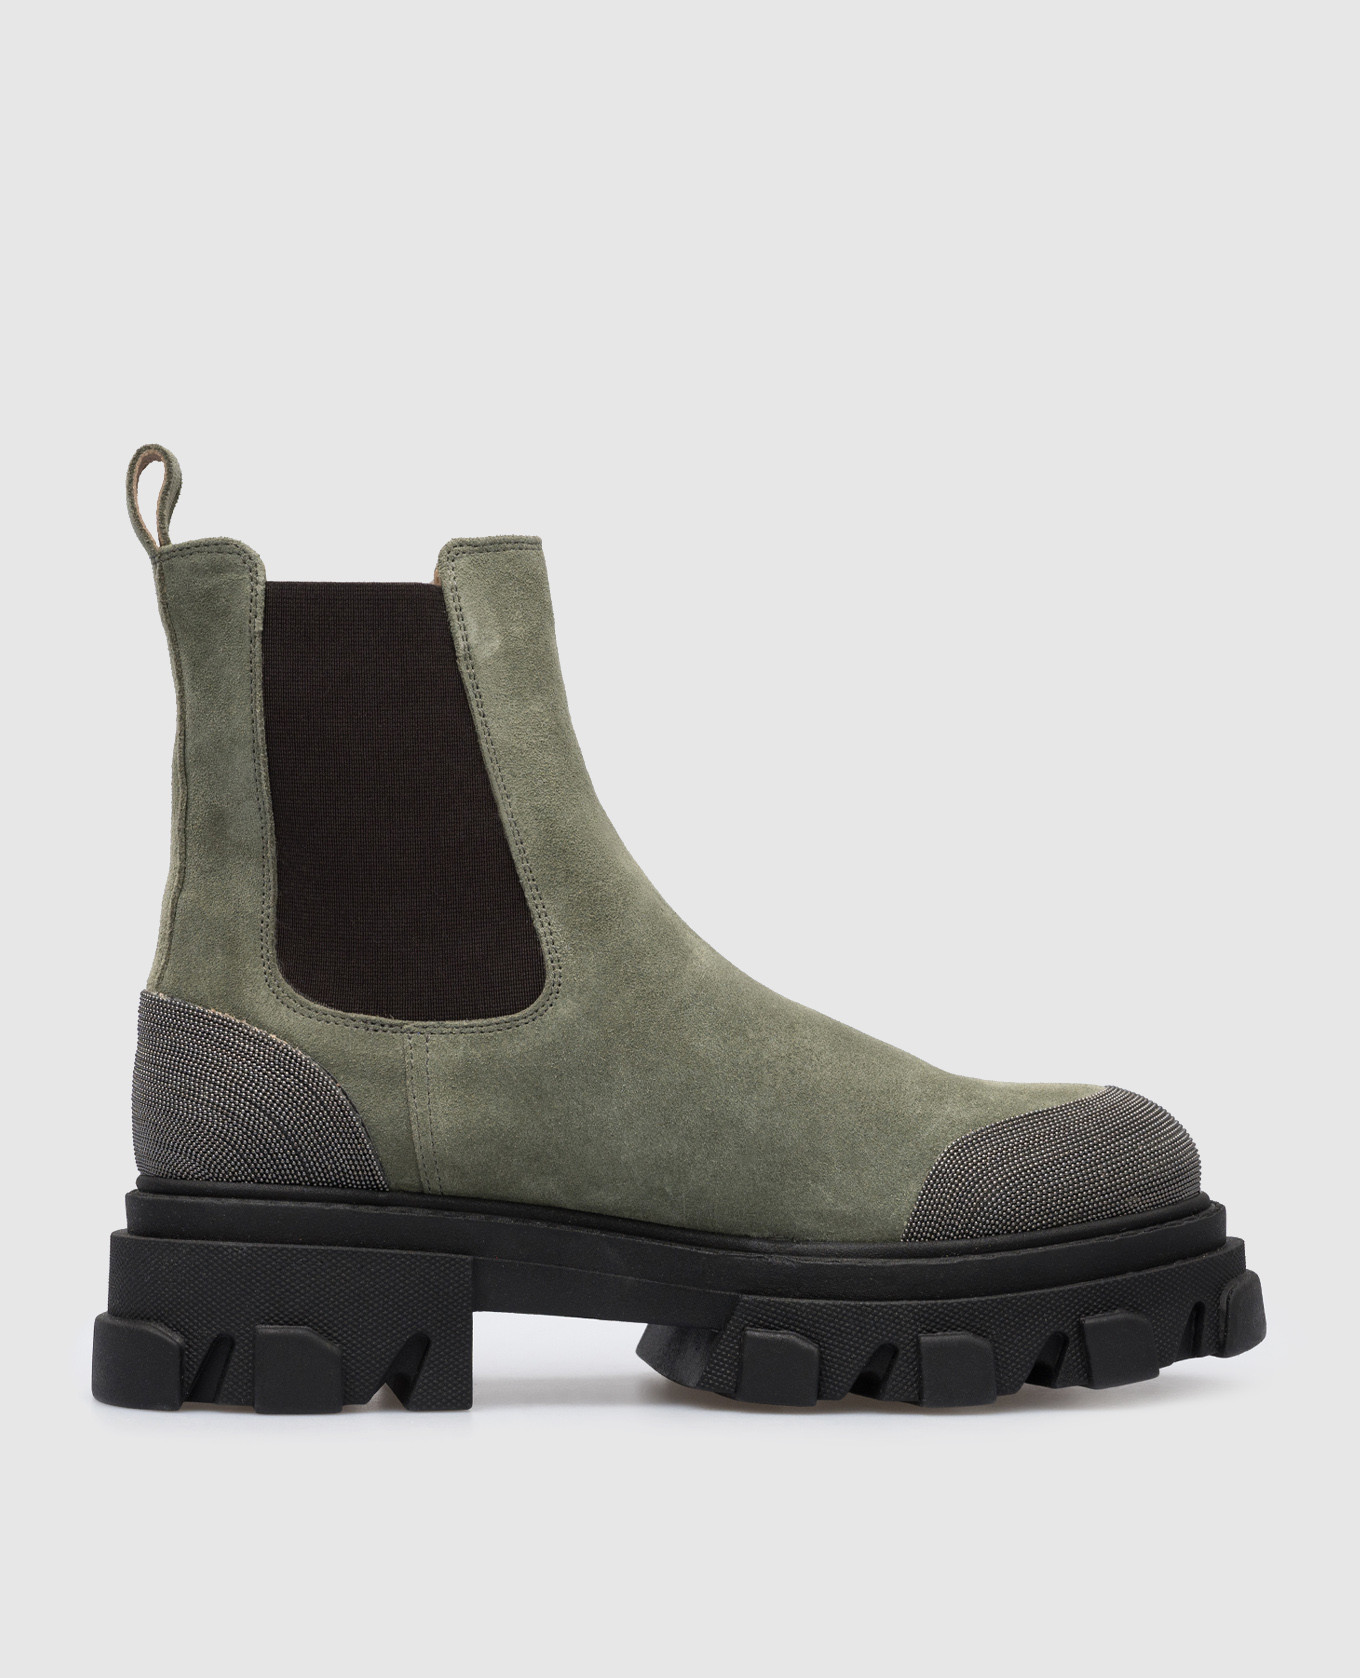 Green suede chelsea boots with monil chain